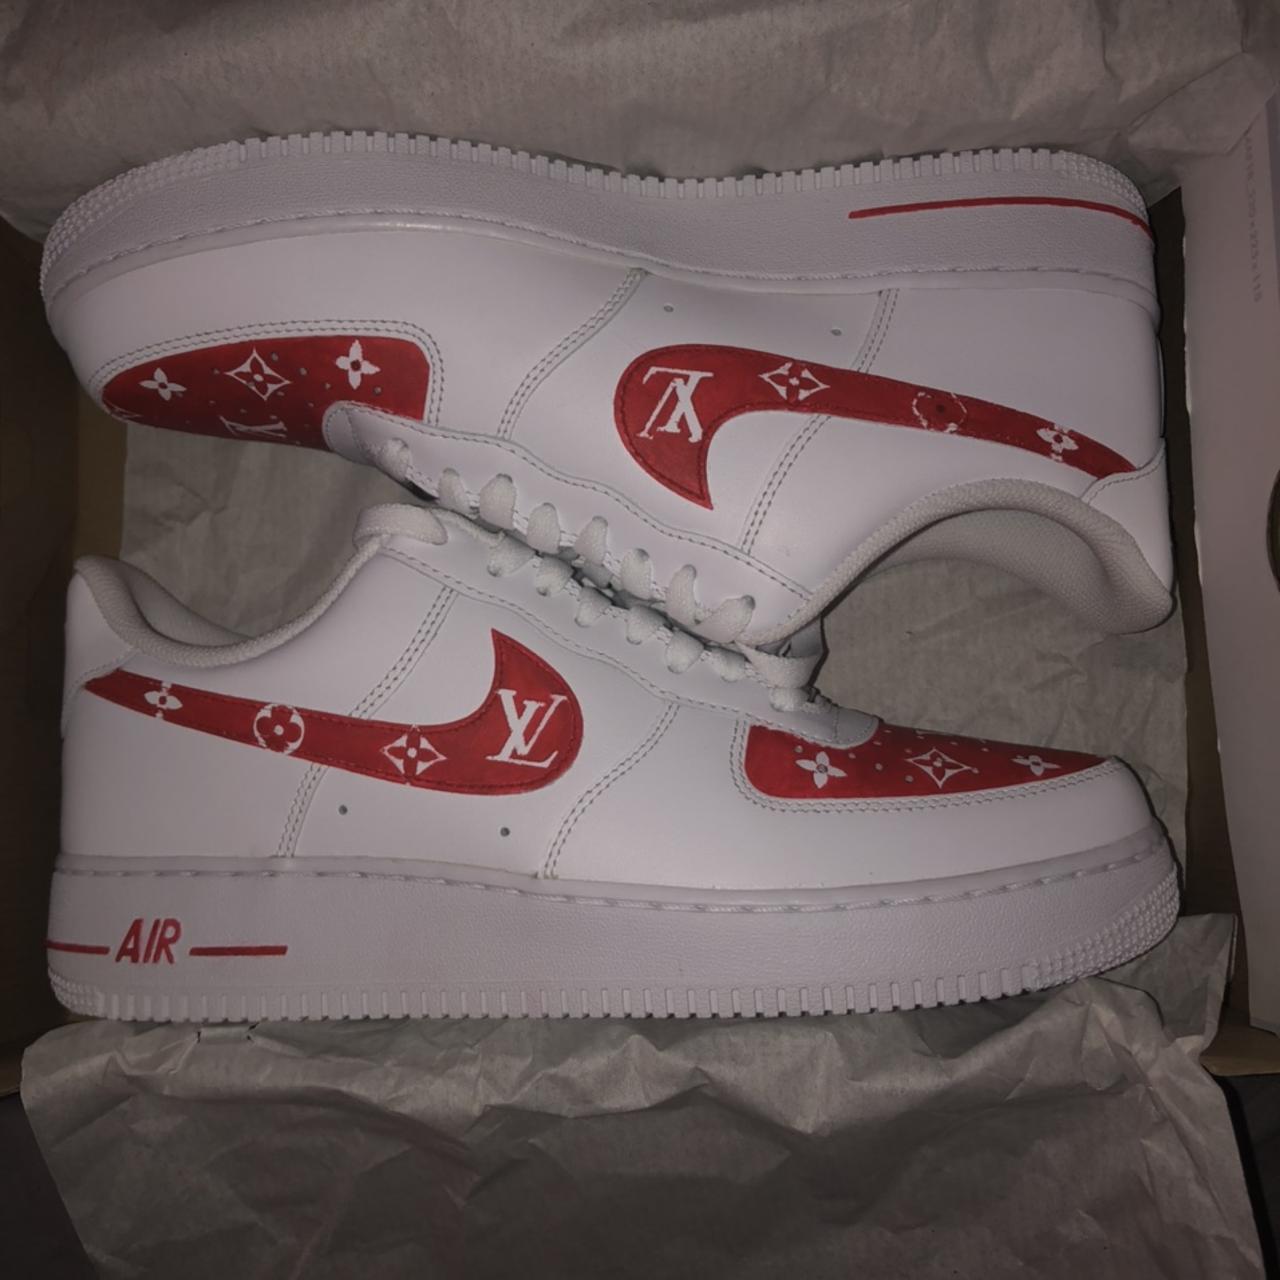 LOUIS VUITTON AIR FORCE 1 Any size available Always - Depop